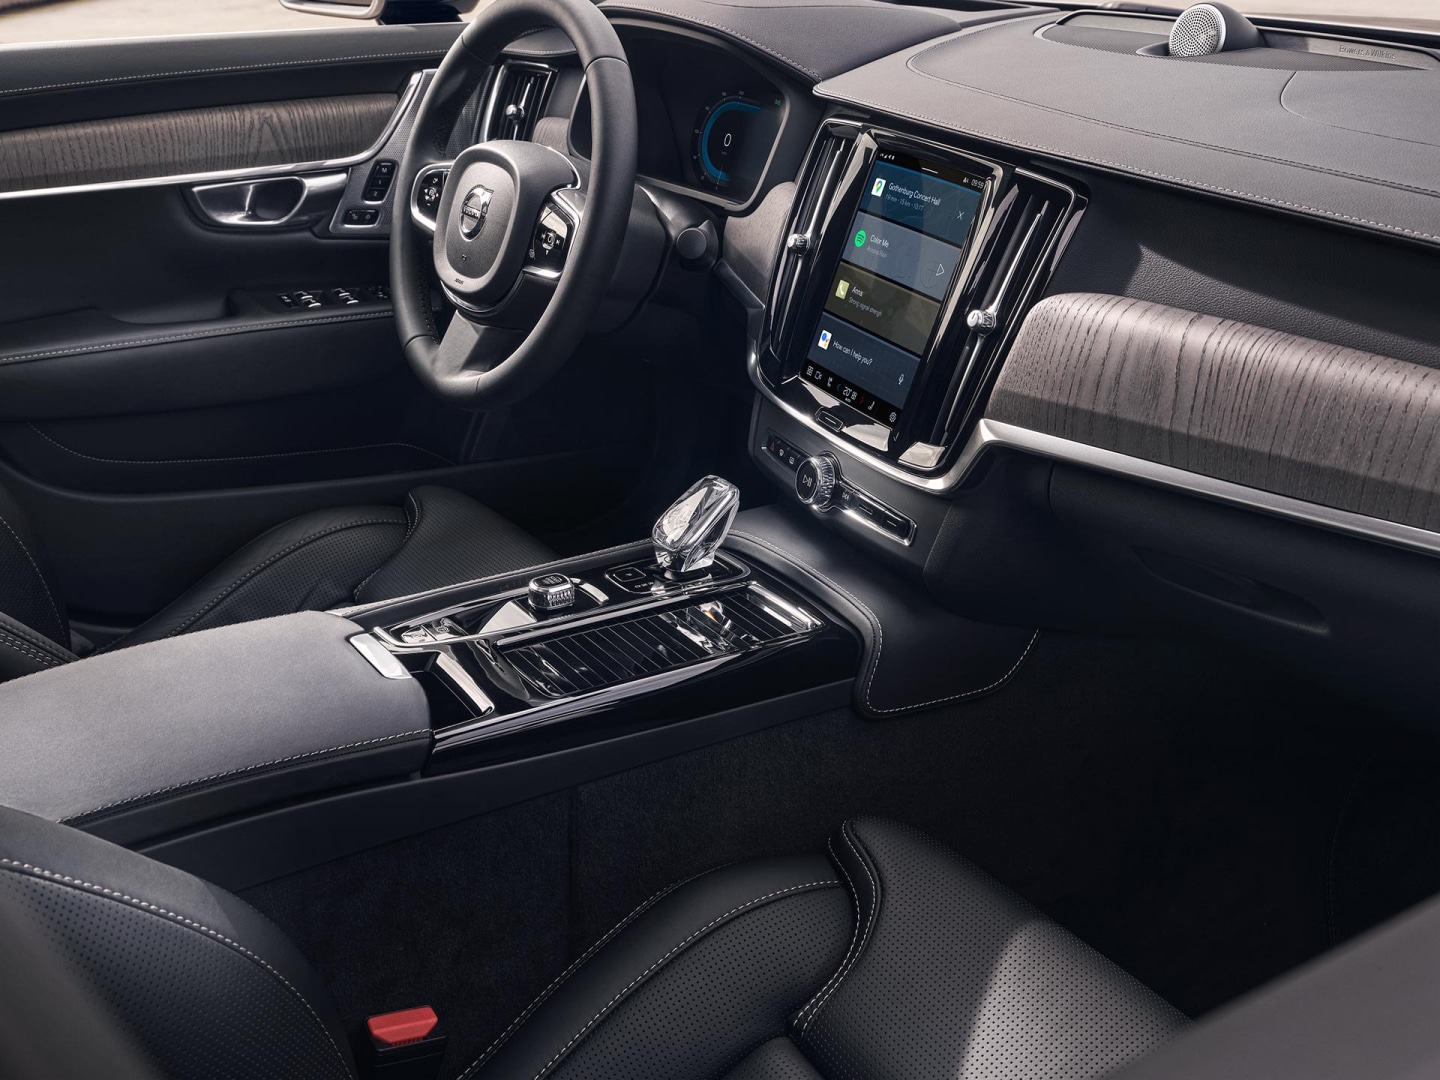 Interior view of the driver's seat, steering wheel and touchscreen centre display from the inside of a Volvo S90 Plug-in hybrid.